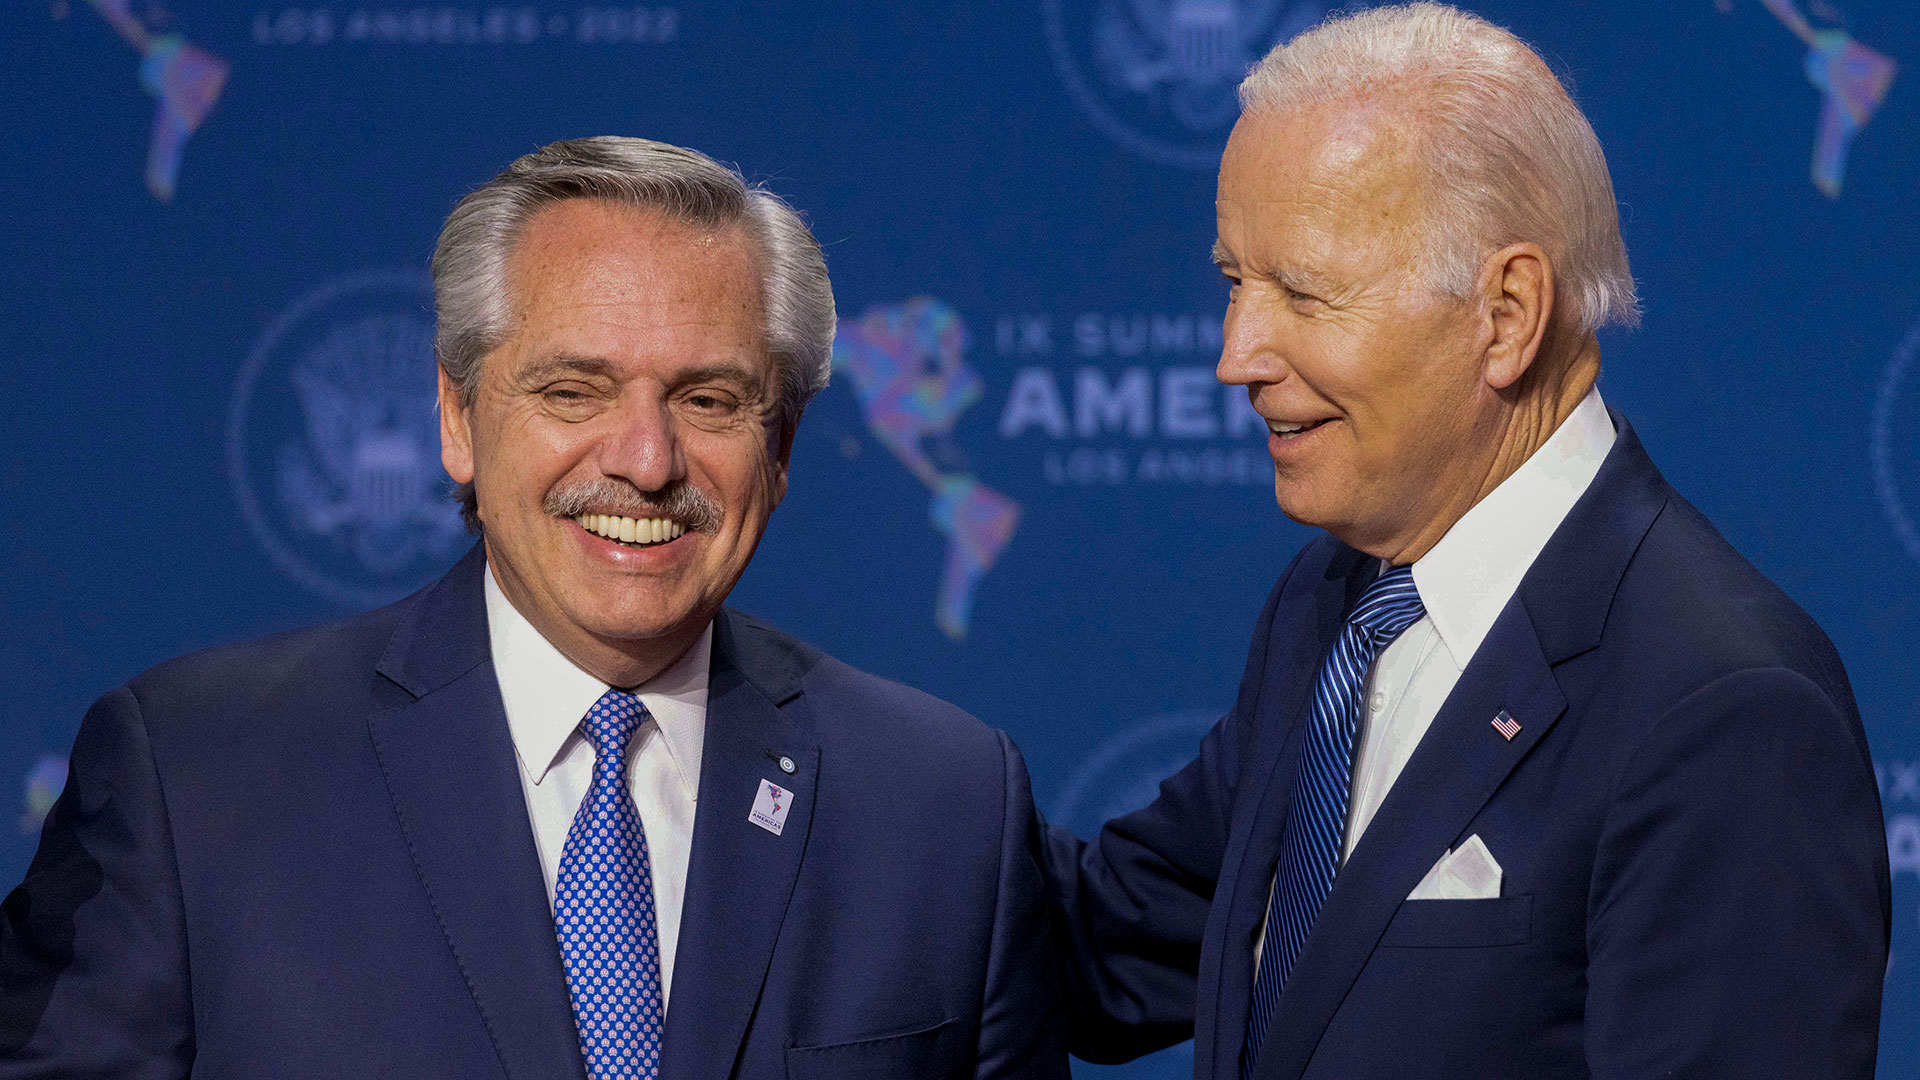 Alberto Fernandez and Joseph Biden during their first official meeting at the Summit of the Americas